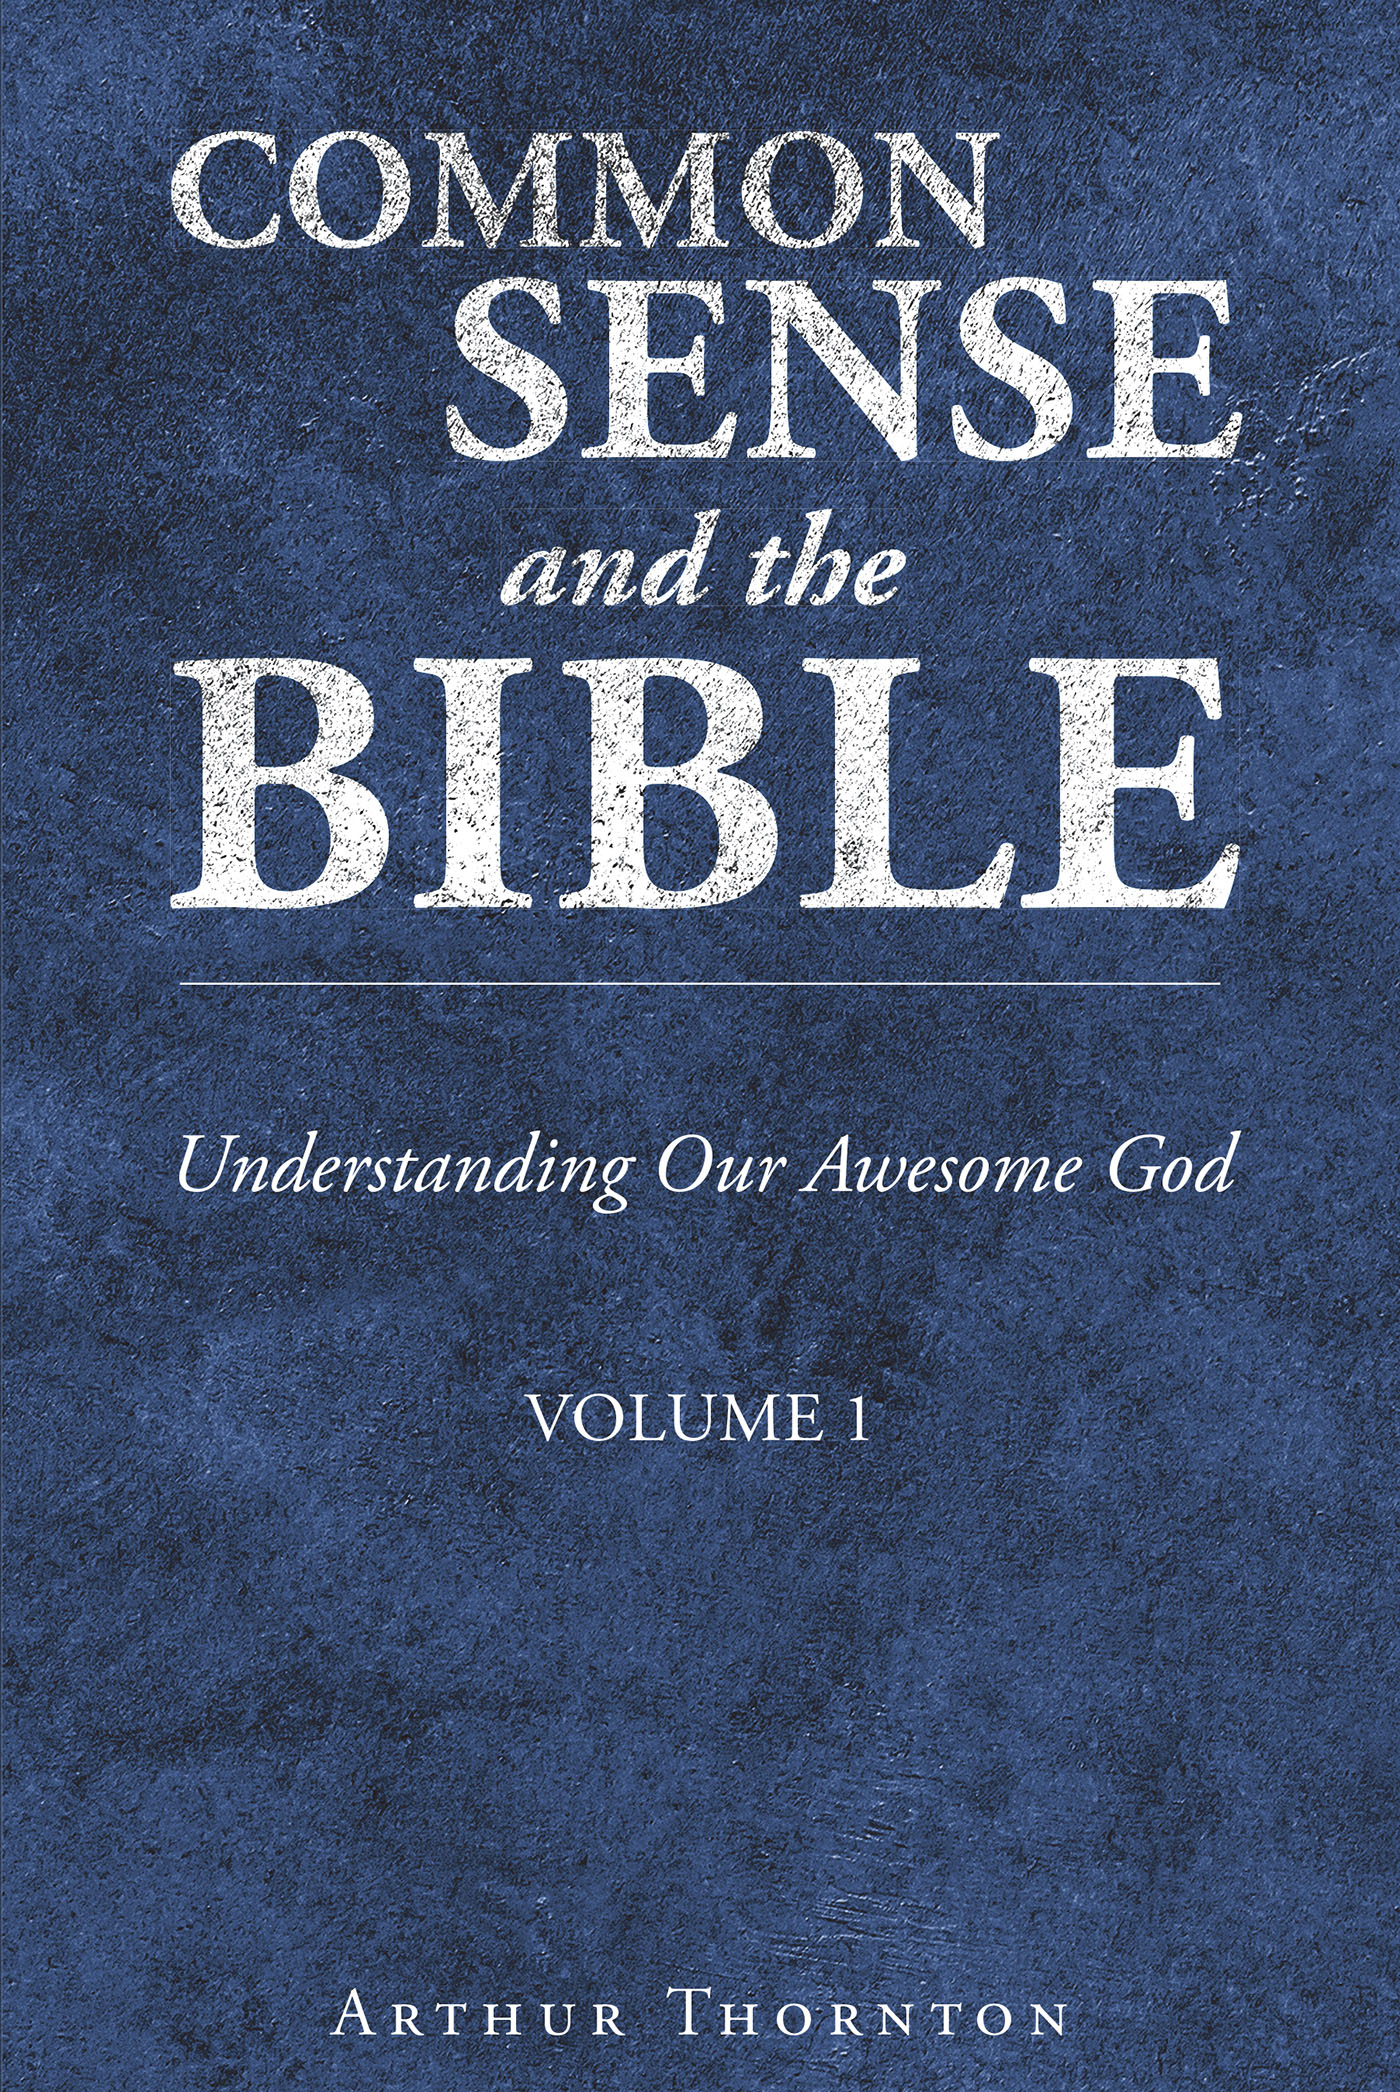 Arthur Thornton’s Newly Released "Common Sense and the Bible: Understanding Our Awesome God: Volume 1" is an Engaging Study of God